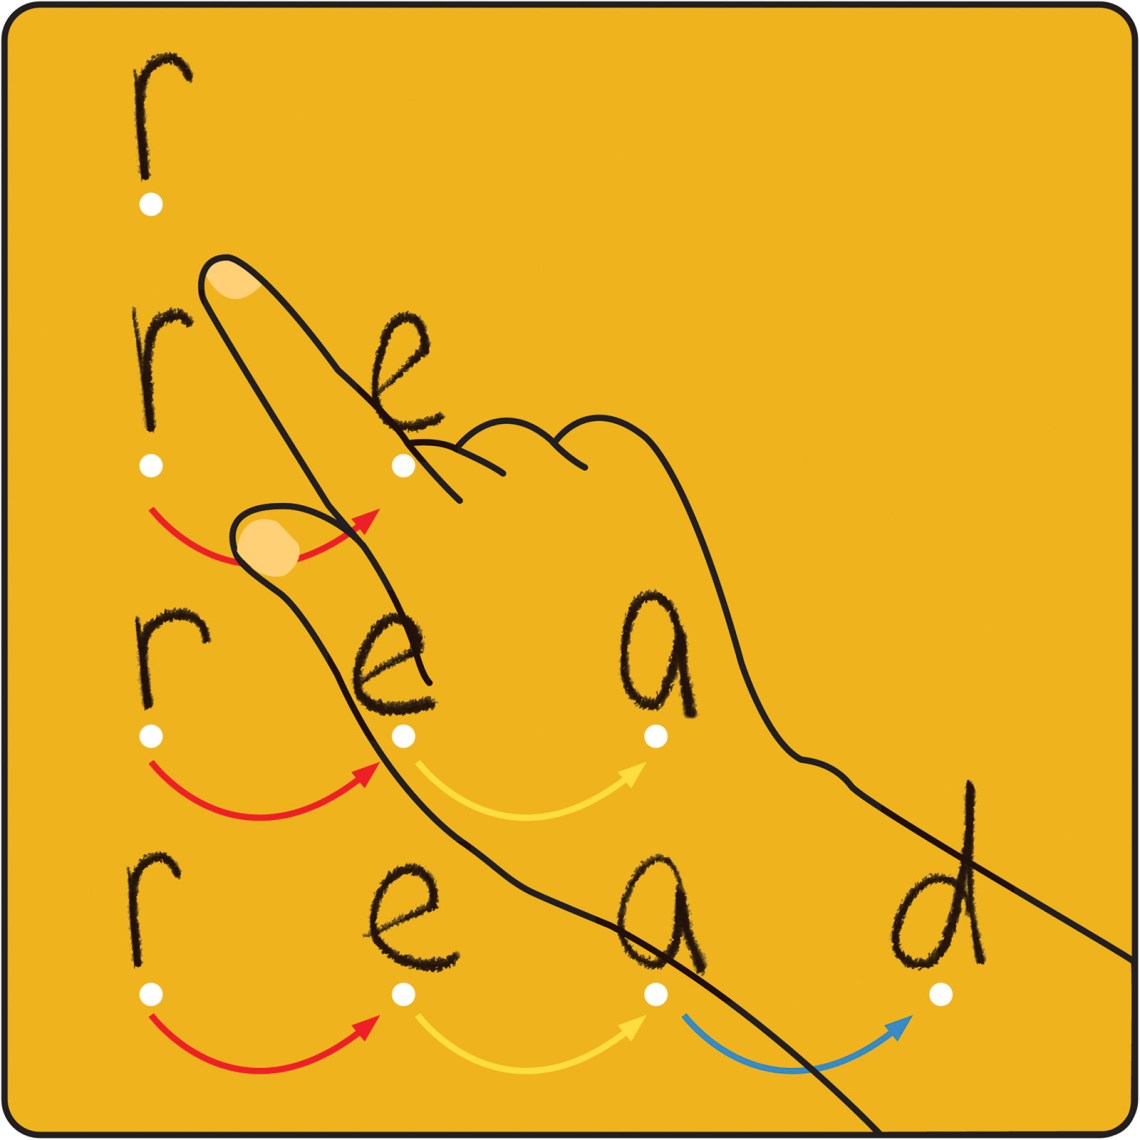 Illustration of a hand and index finger pointing to the letters r, e, a, d